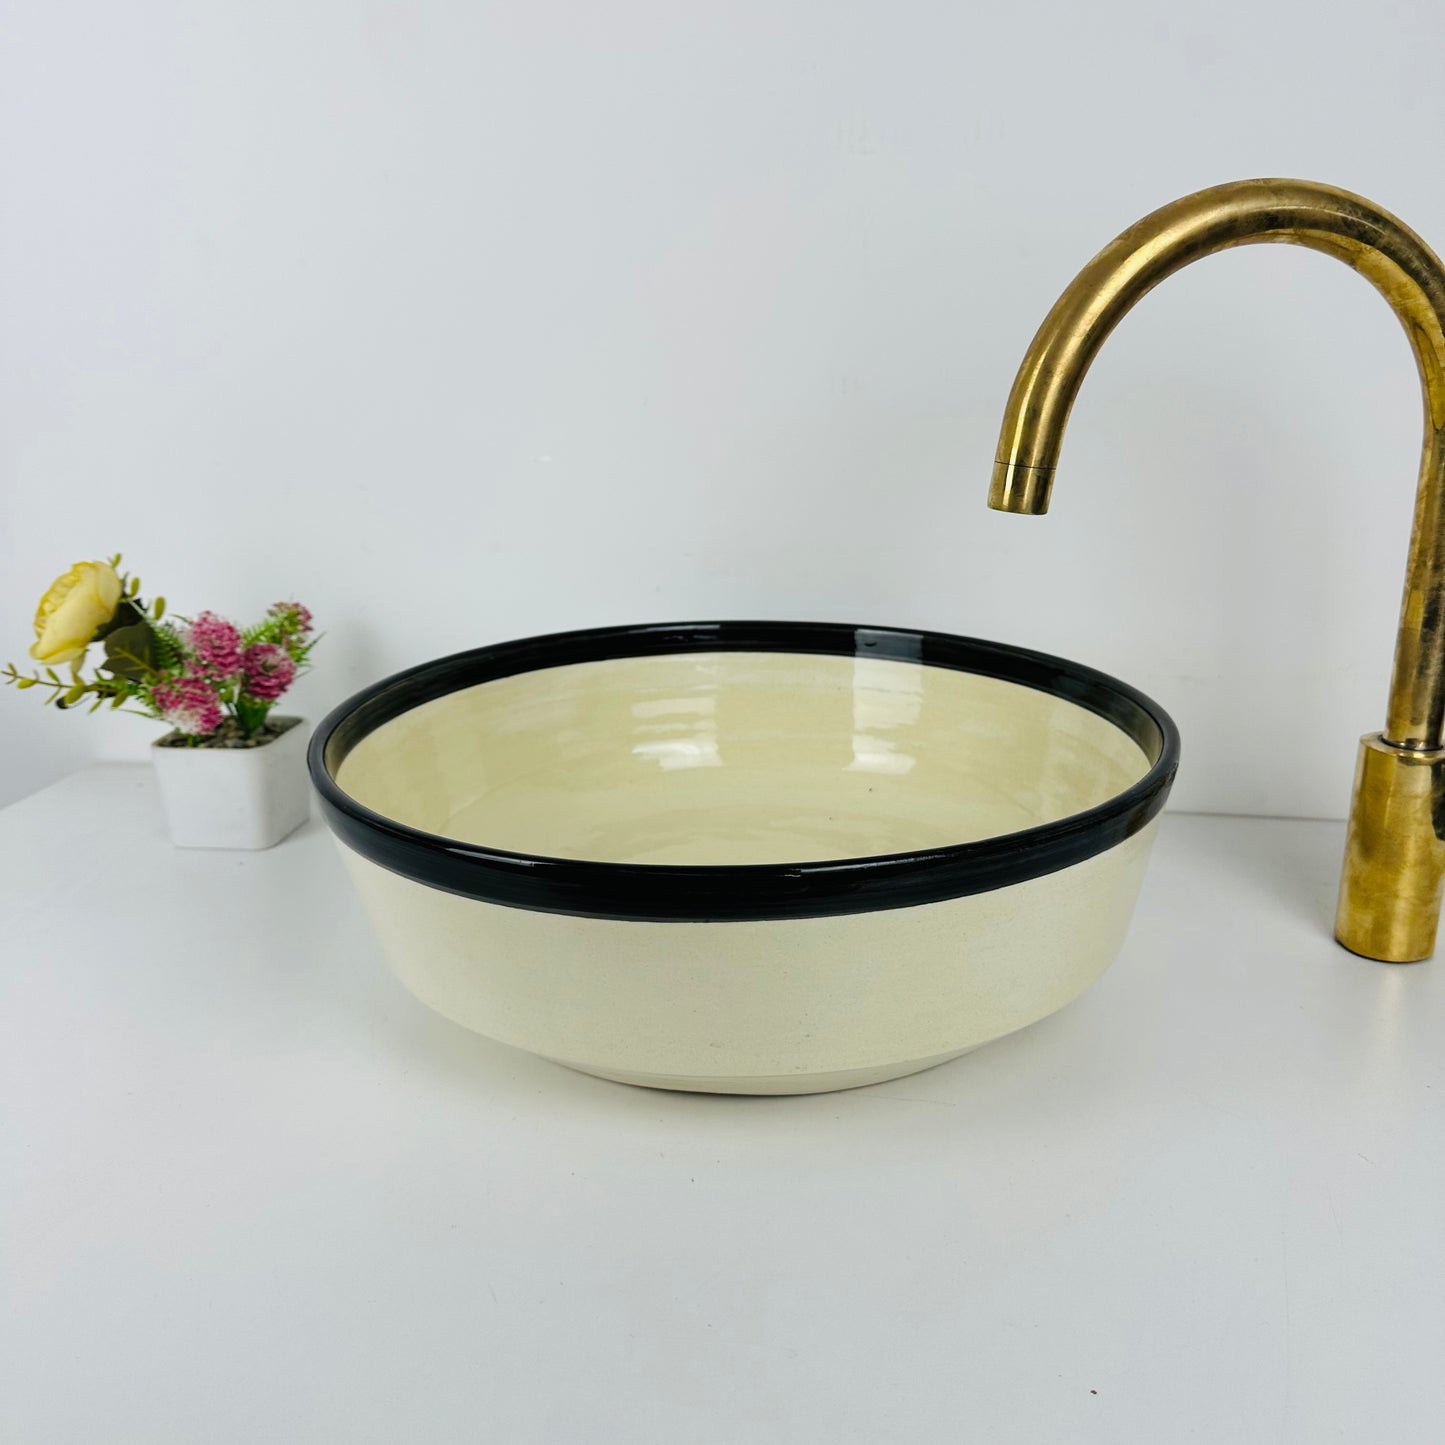 Color Crest: Handcrafted Ceramic Sink with Topped black Finish